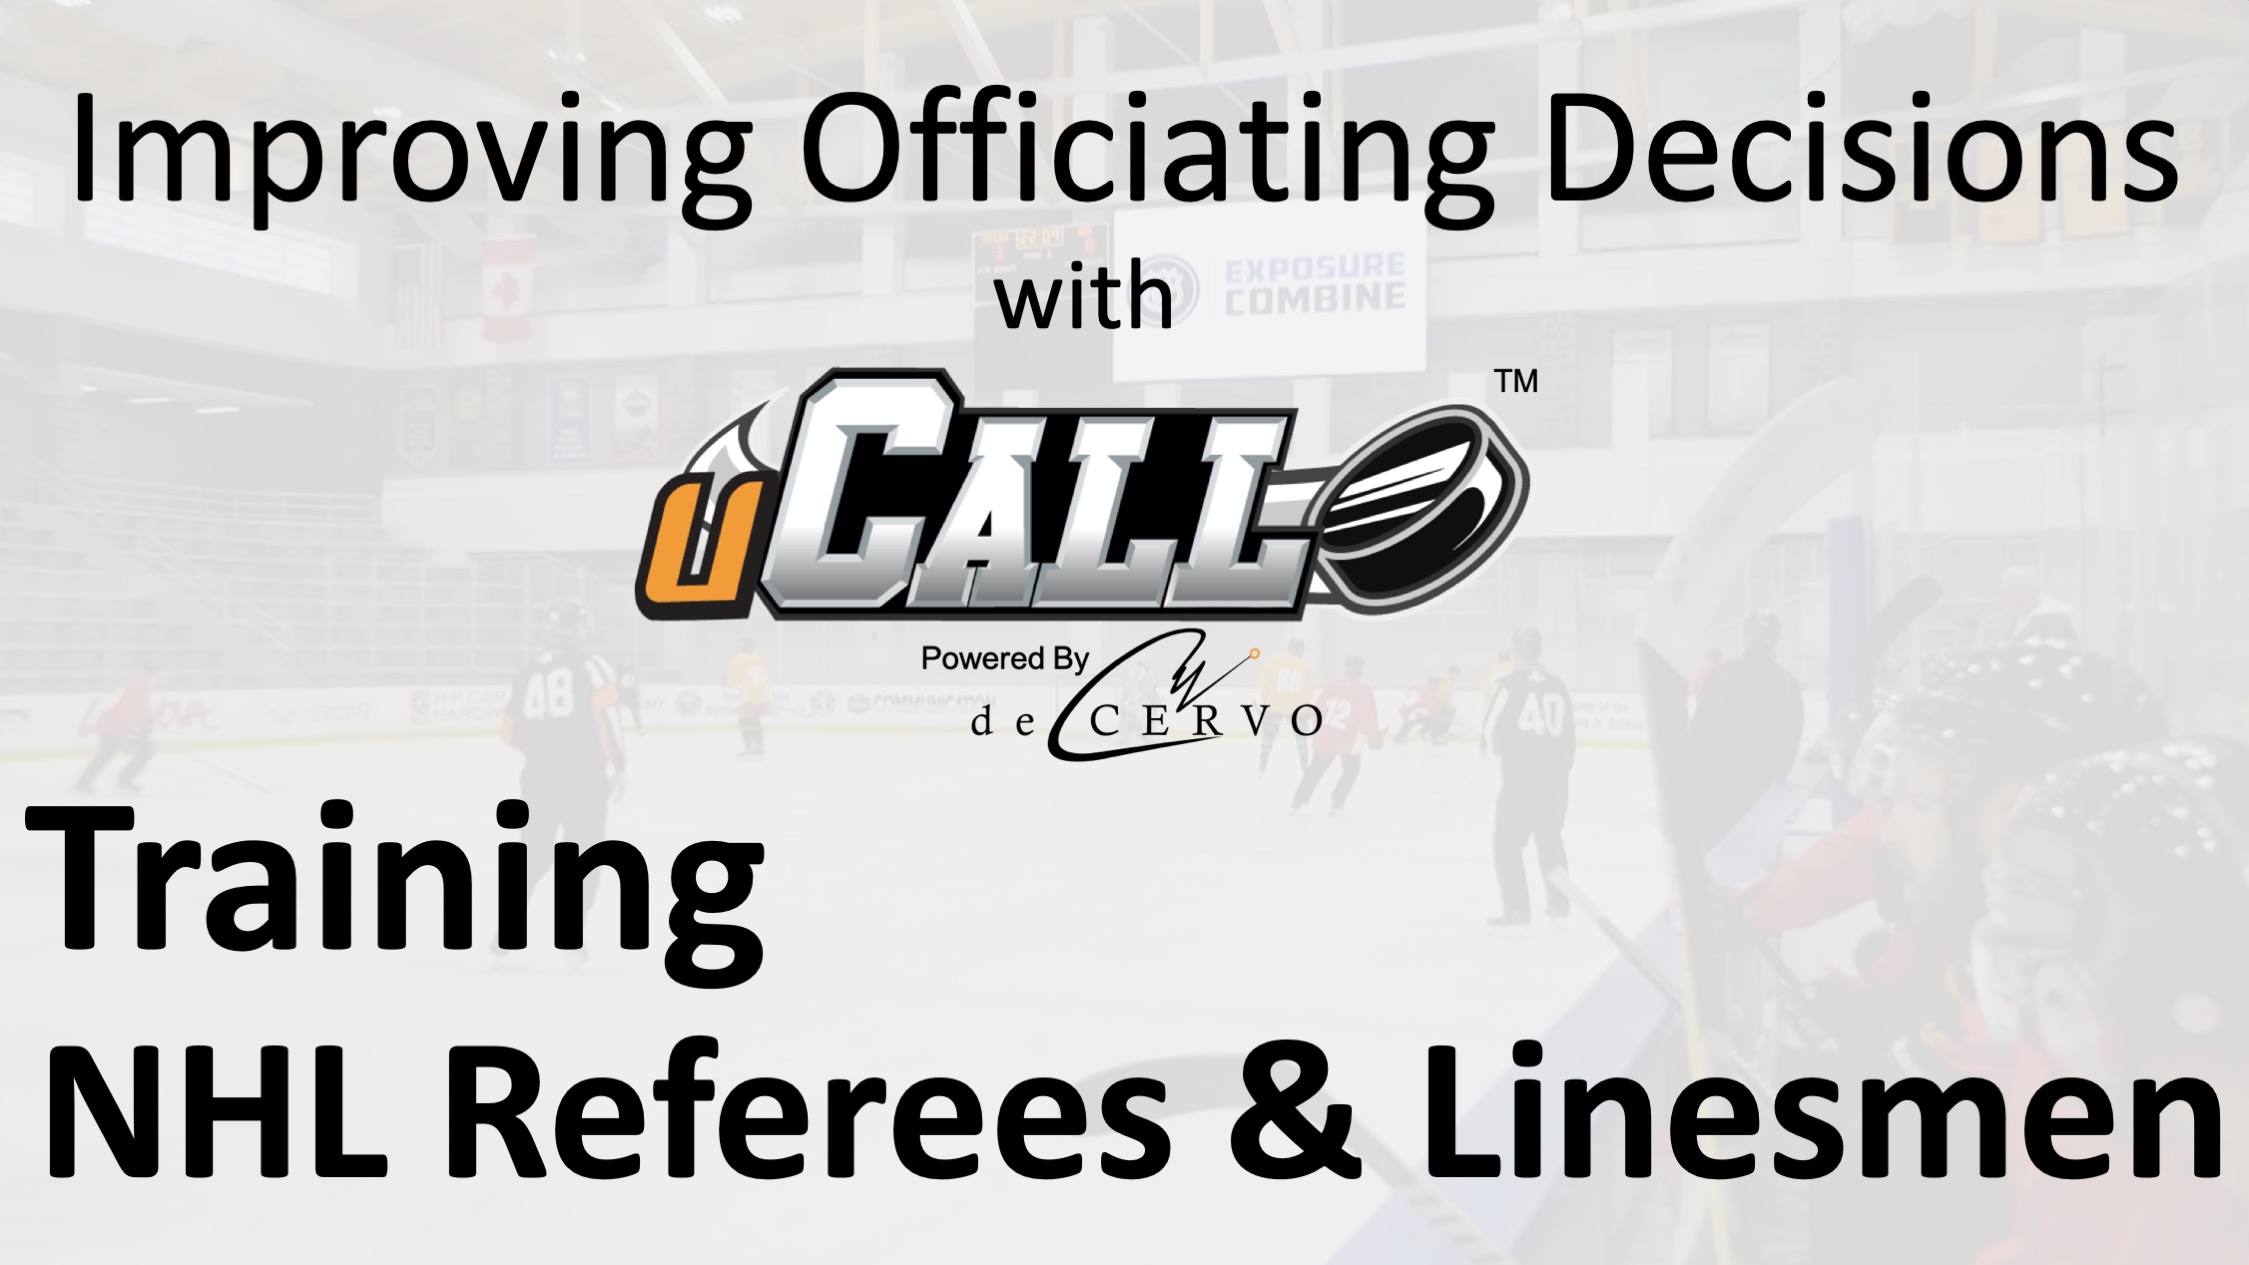 Improving Officiating Decision with uCALL. A decision training case study in NHL Referees and Linesmen